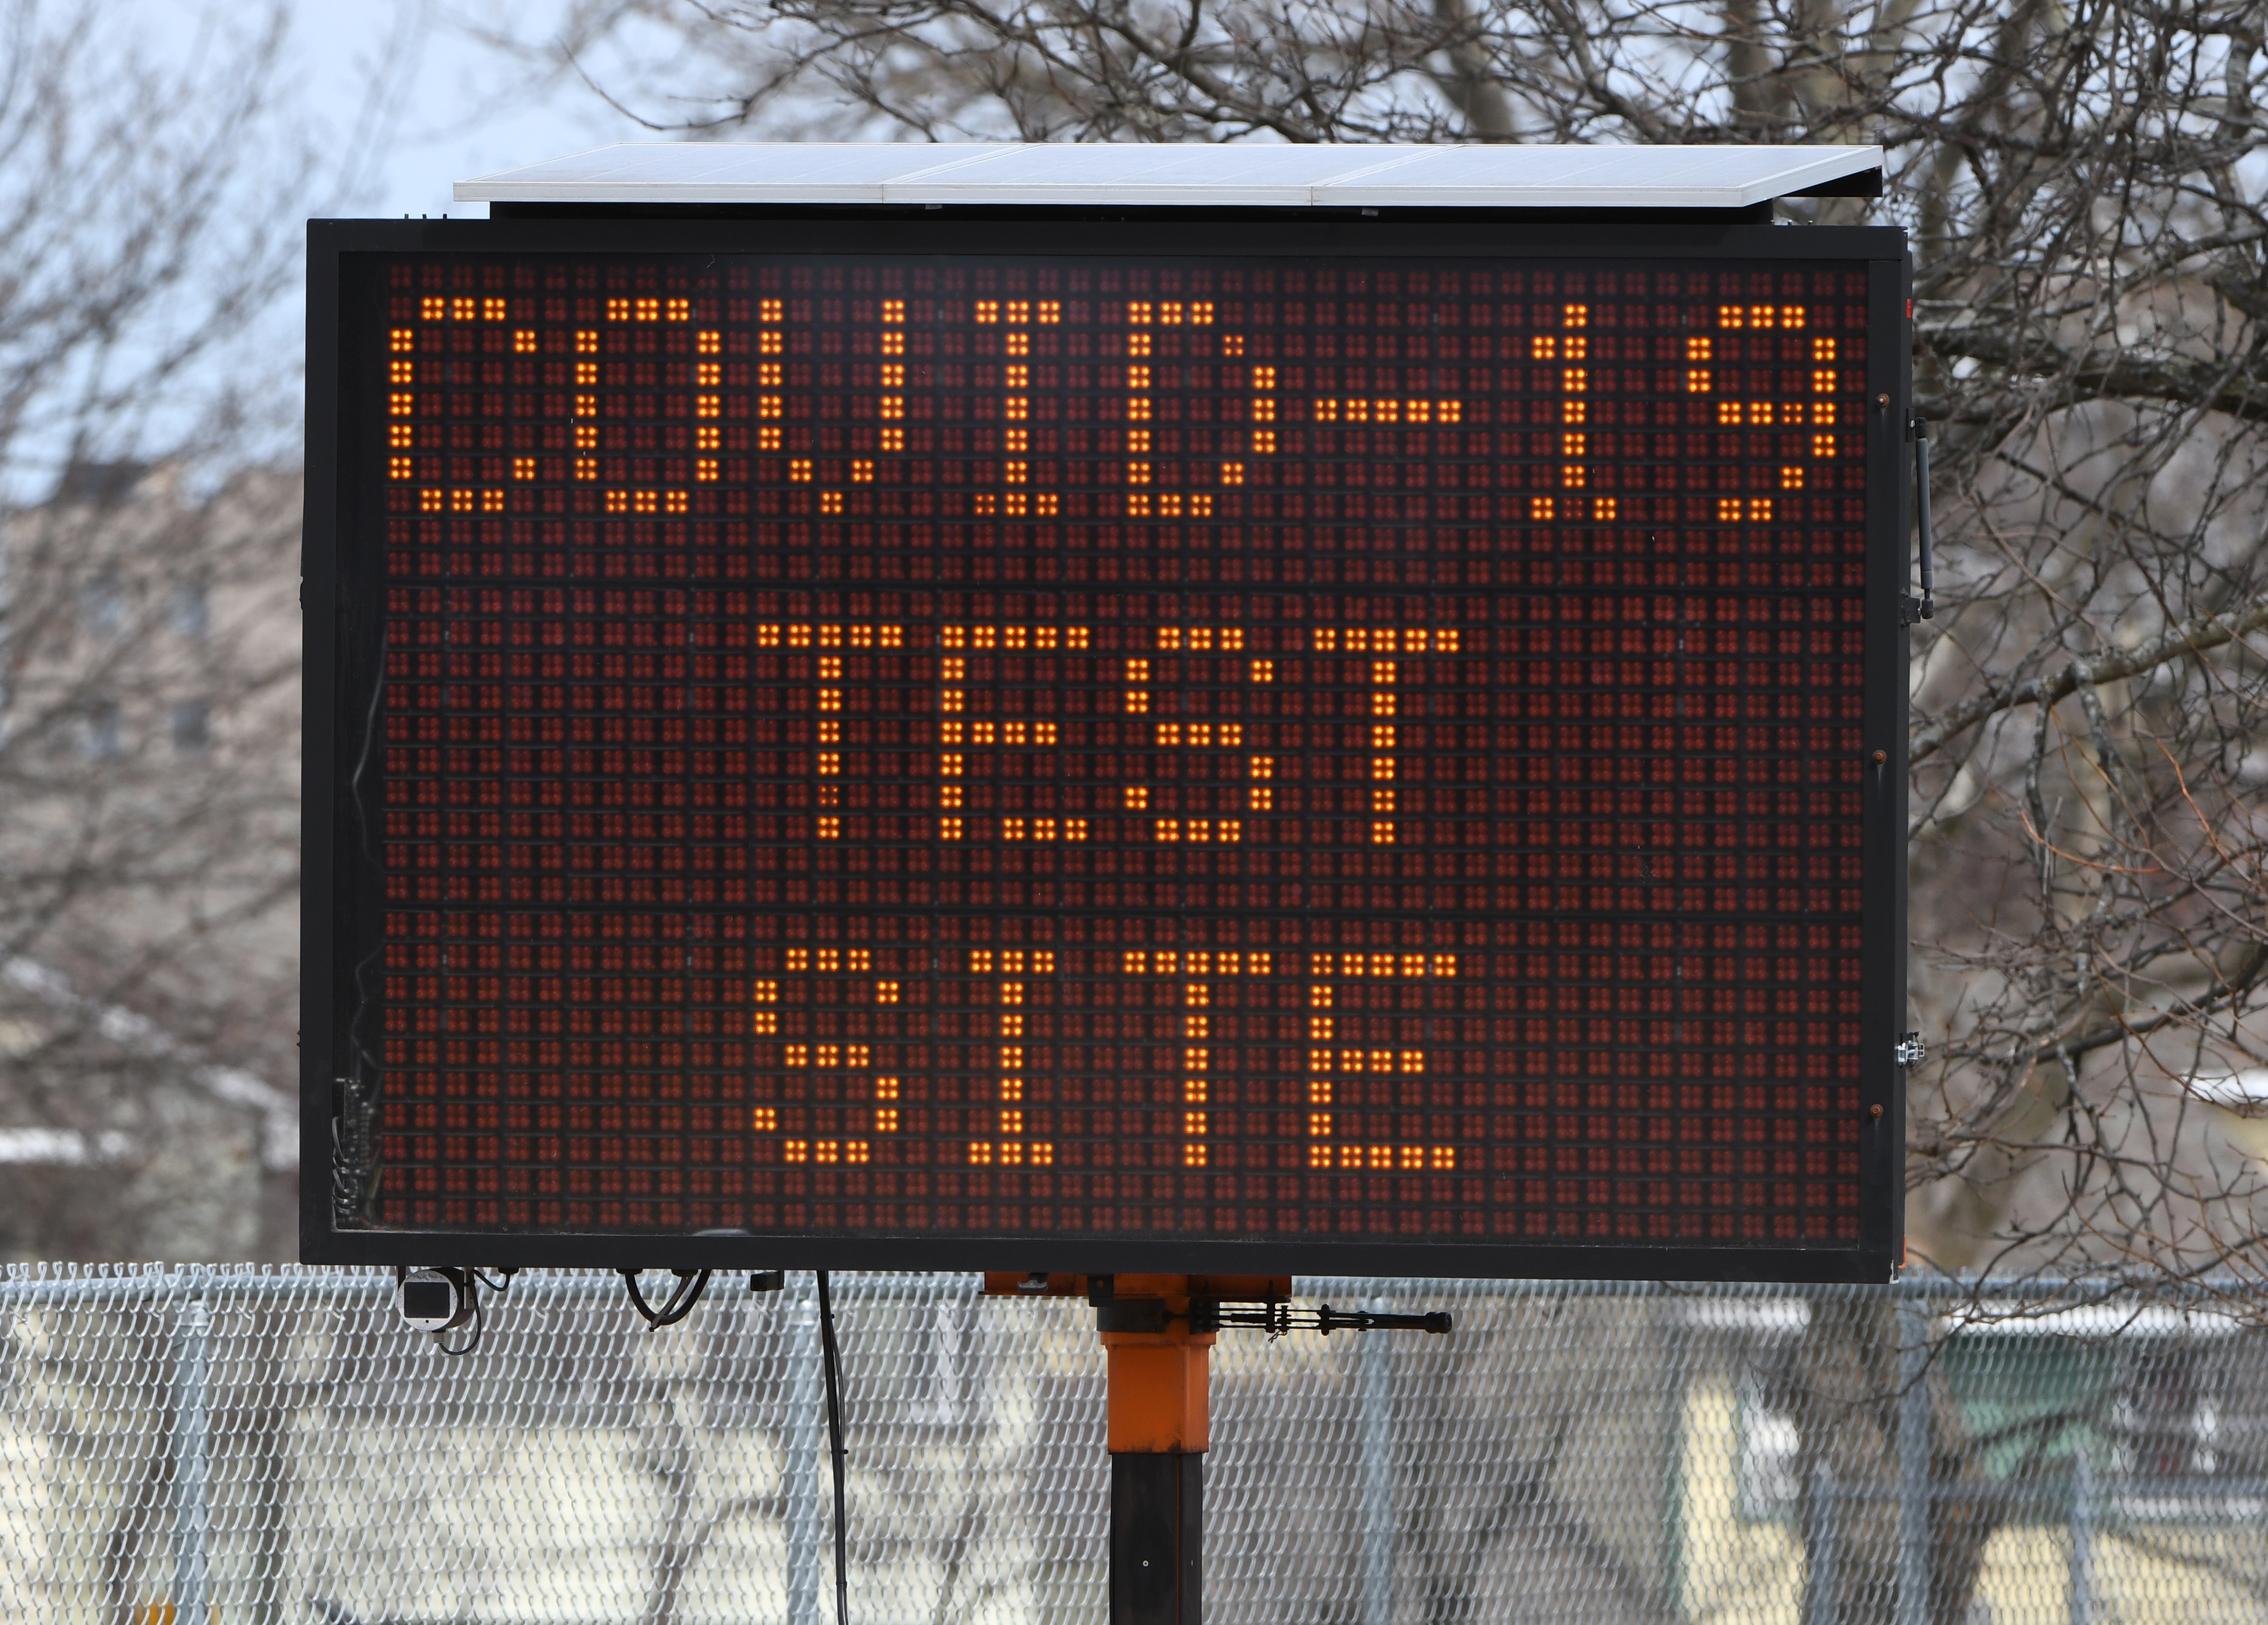 The Syracuse Community Health Center Covid 19 mobile test site, 819 S. Salina St., March 26, 2020.